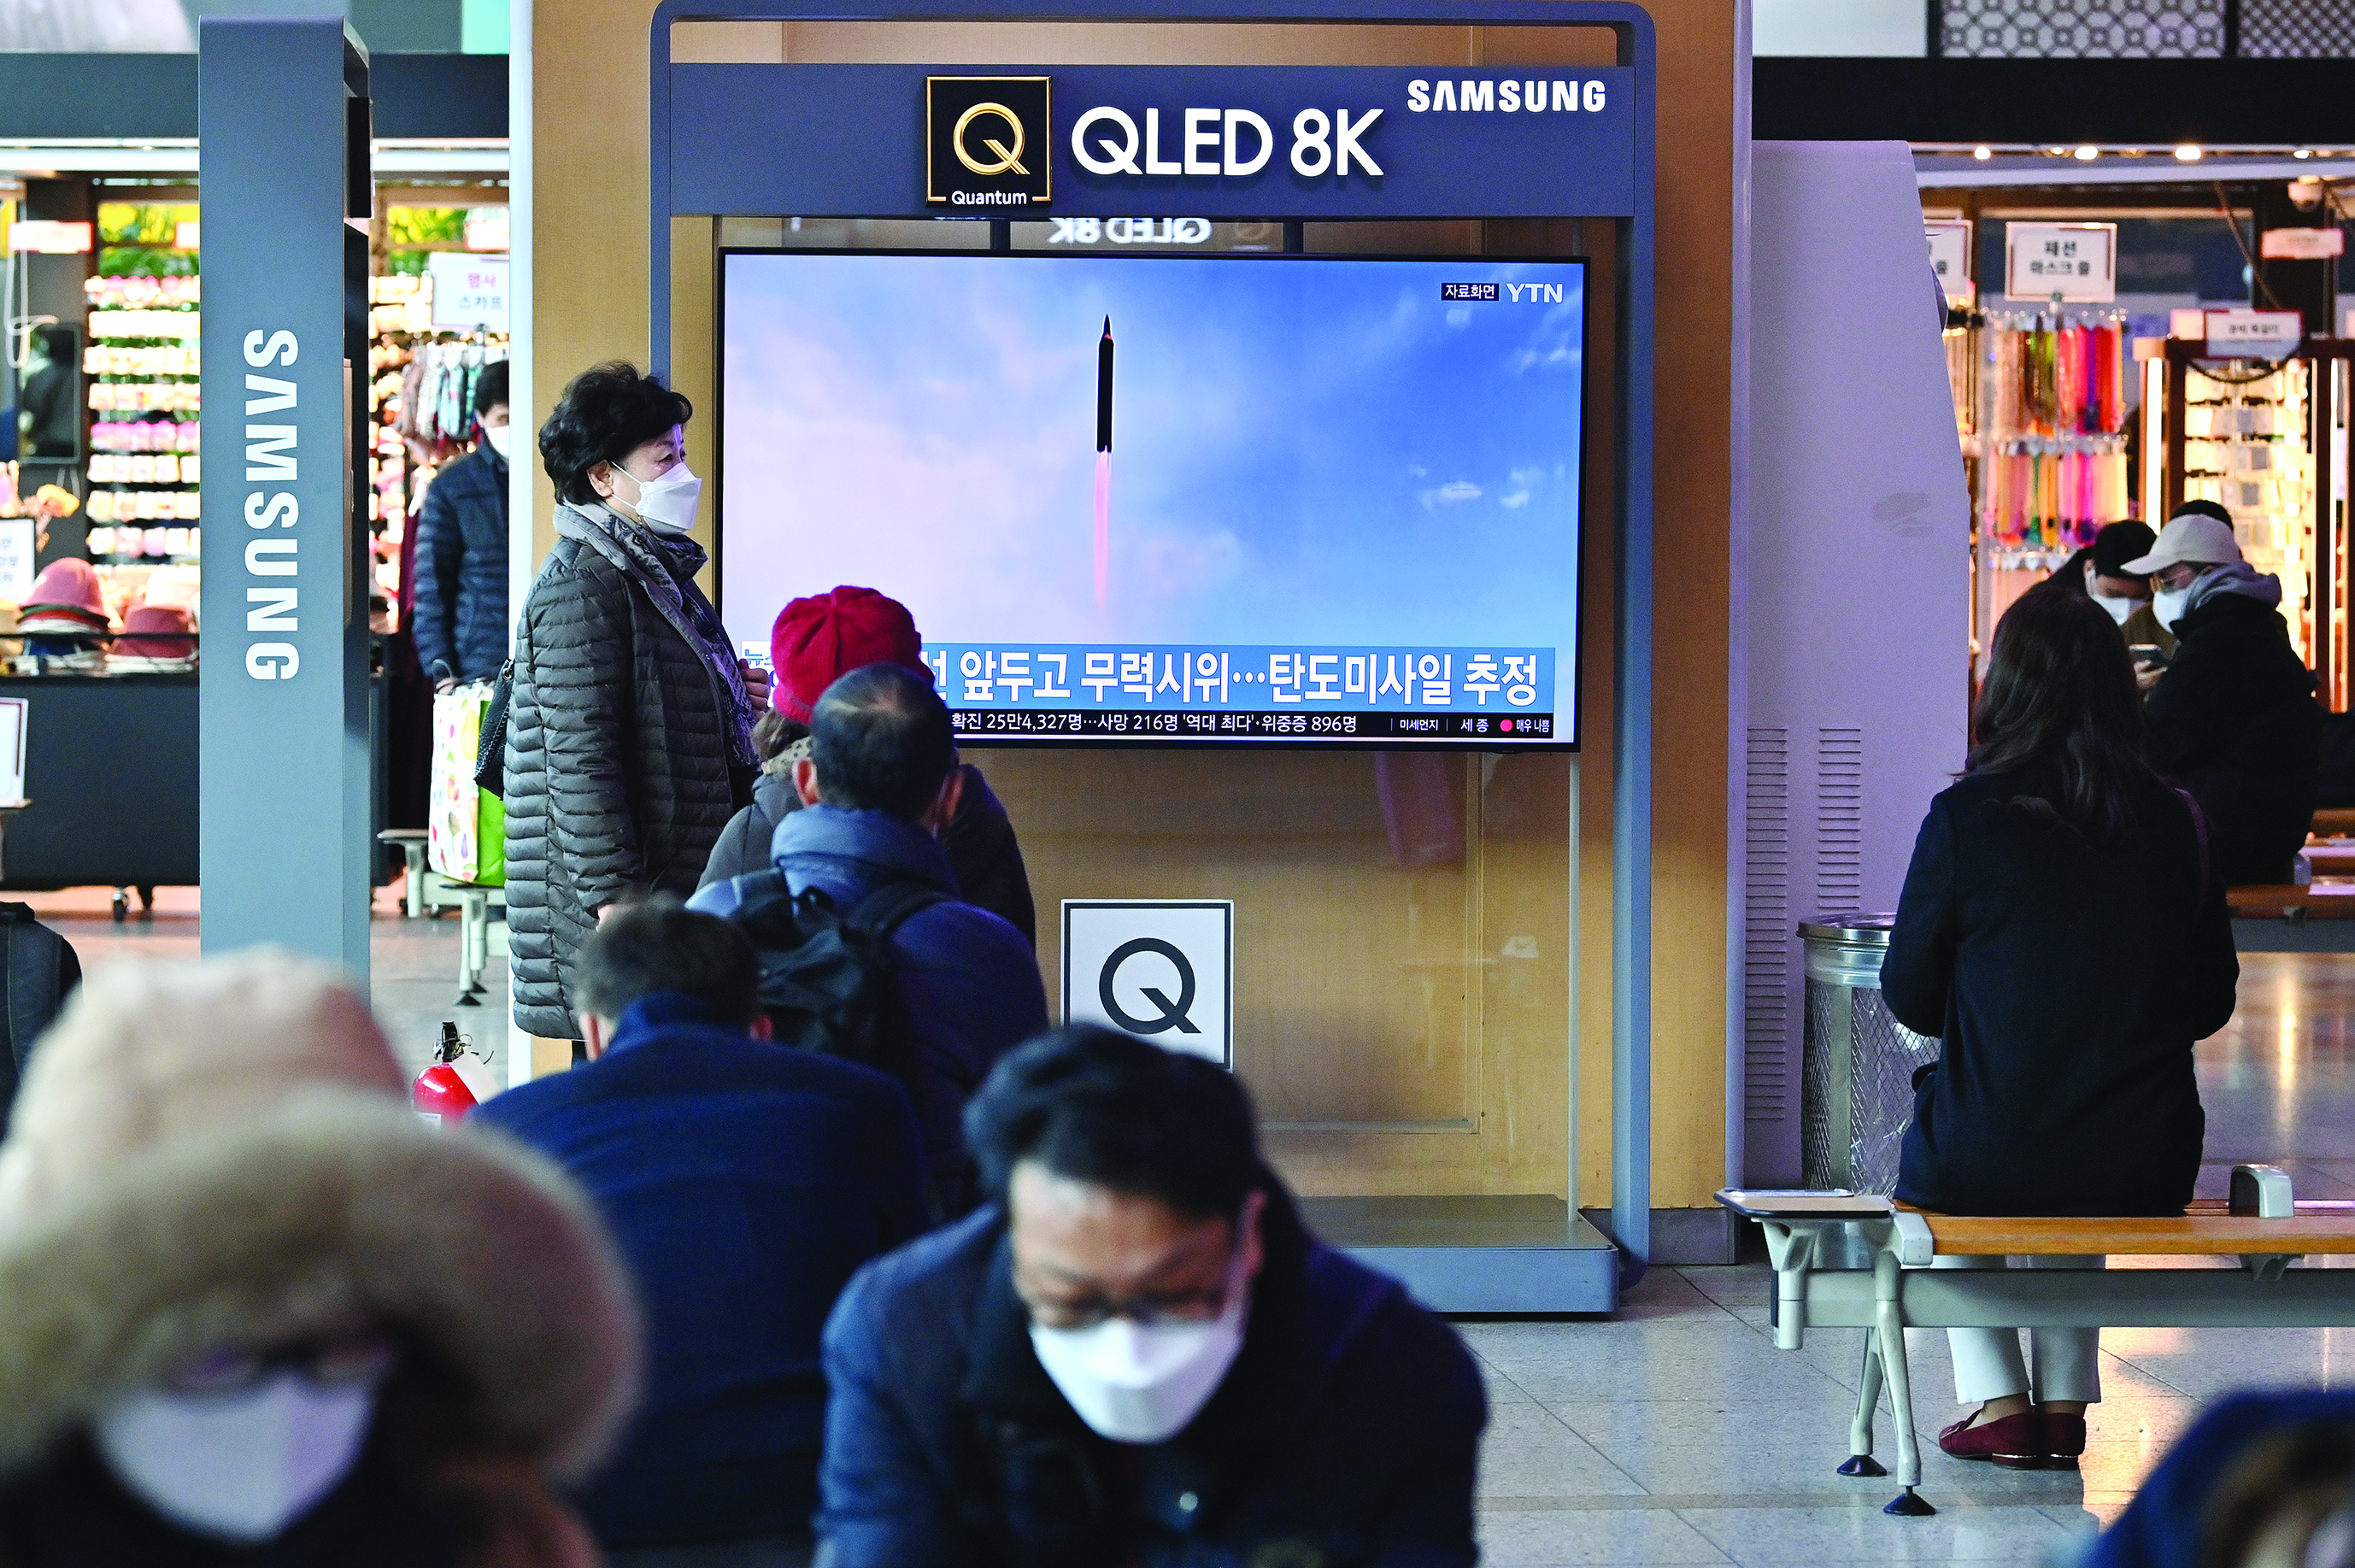 SEOUL: People watch a television screen showing a news broadcast with file footage of a North Korean missile test, at a railway station in Seoul yesterday. - AFPn